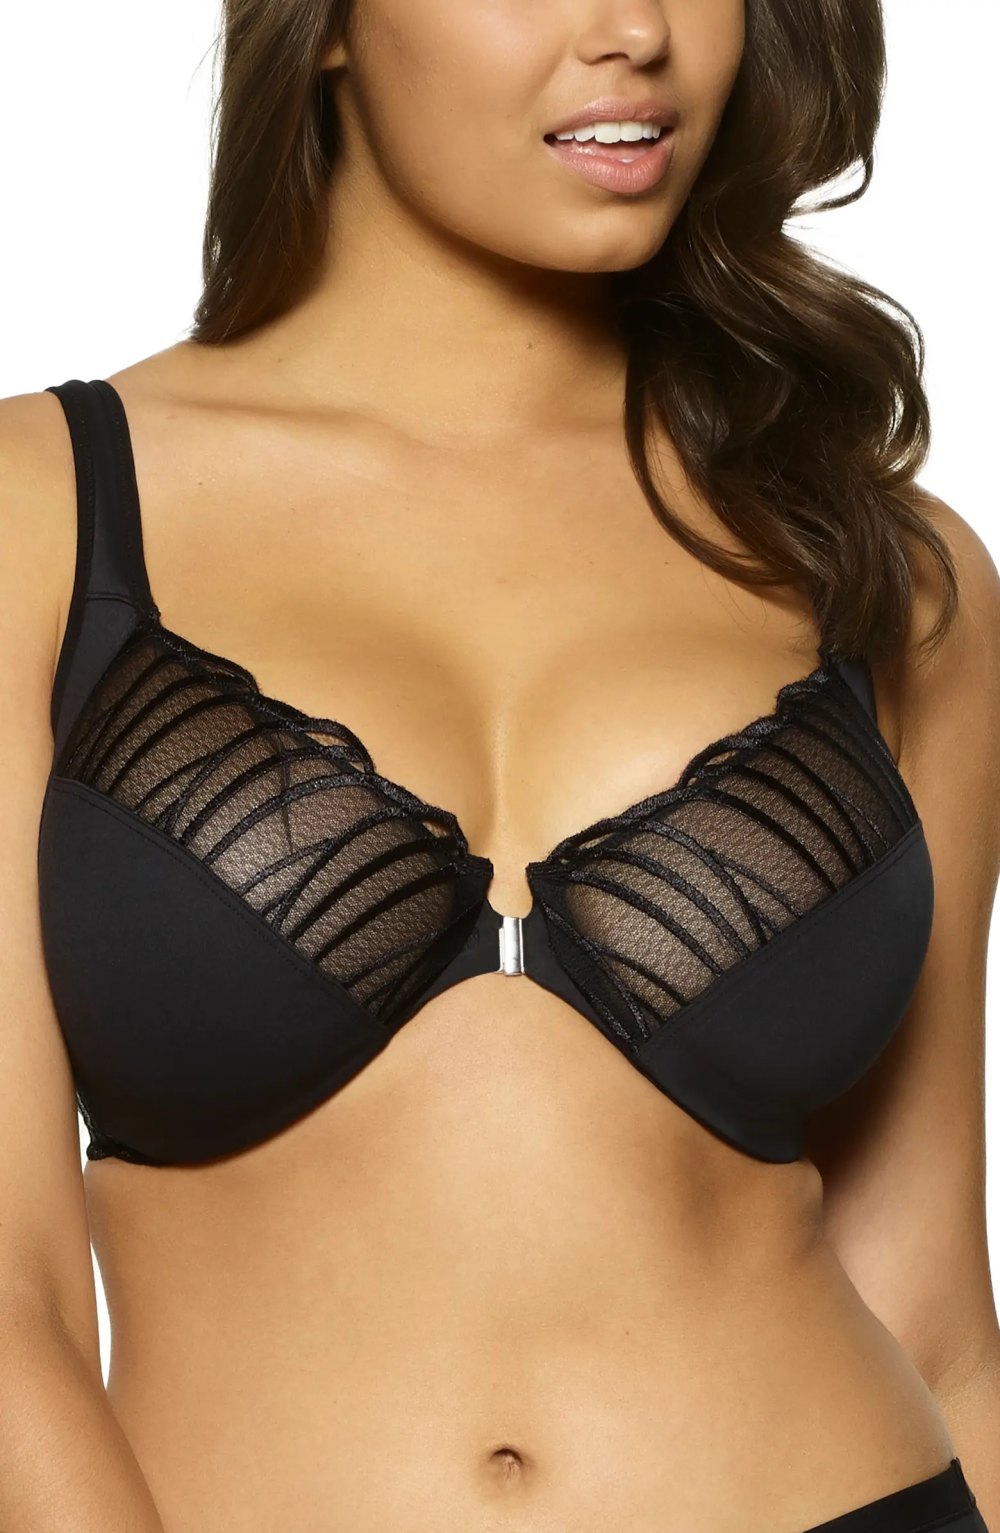 TIANZHU Soft Wirefree Minimizer Bras for Women Full Coverage No